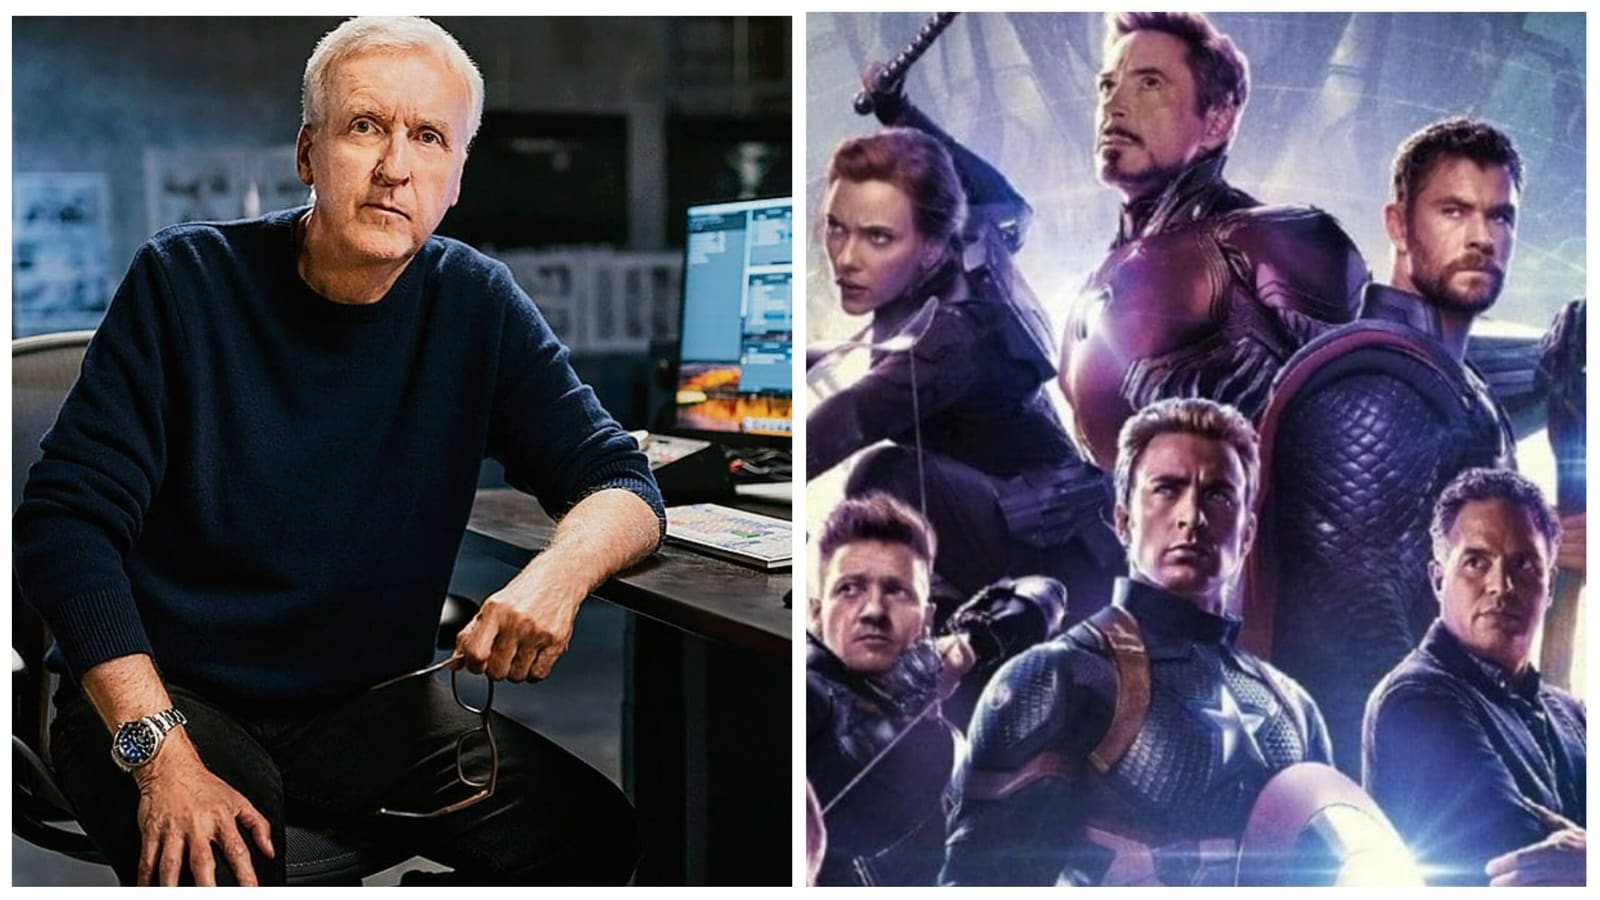 James Cameron calls Avatar heroes more real than superheroes who ‘never have kids’; Marvel fans remind him of Iron Man